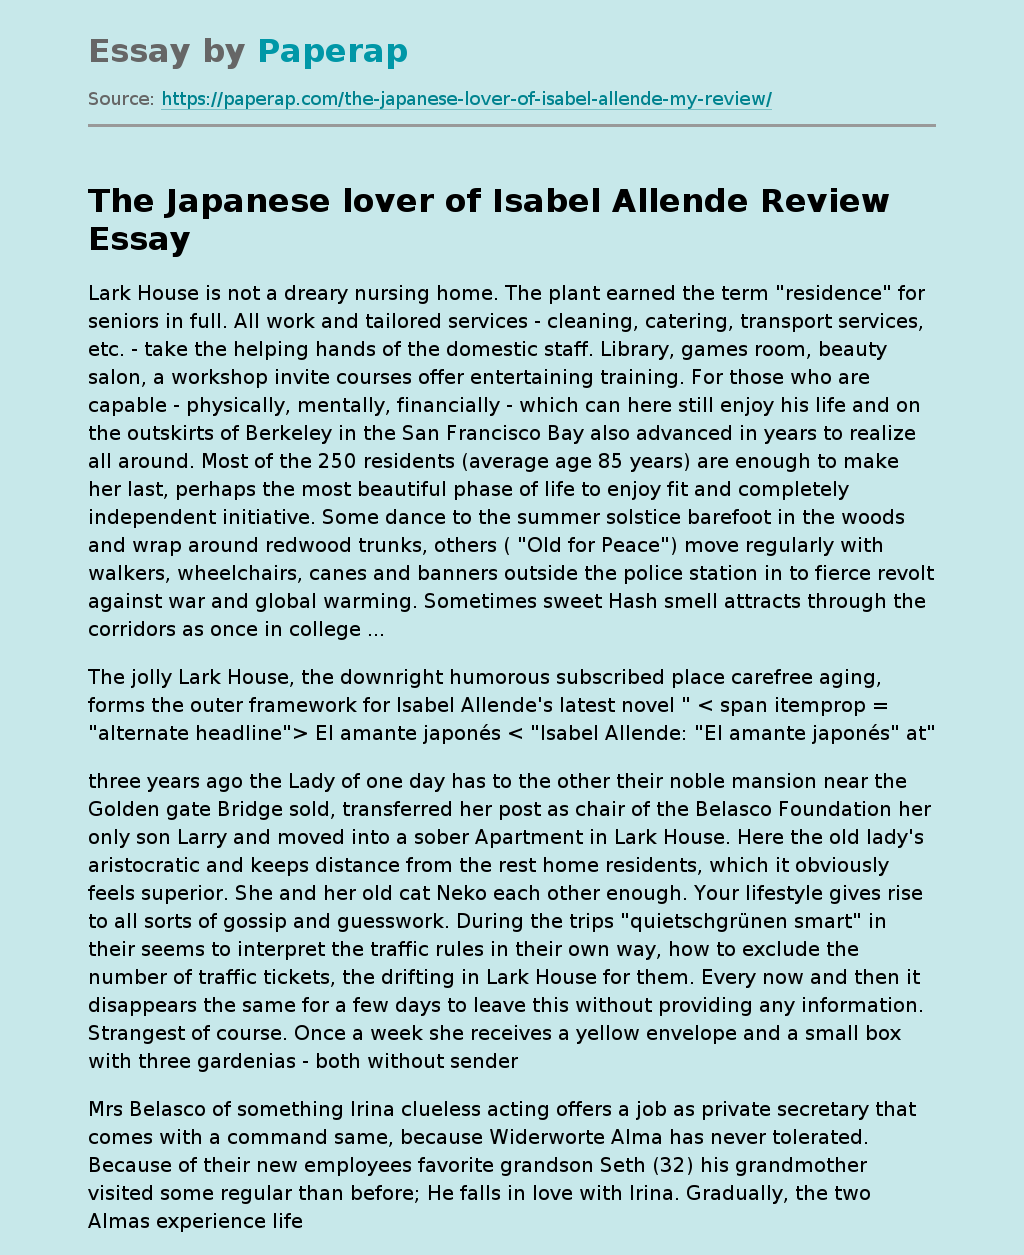 "The Japanese lover" by Isabel Allende